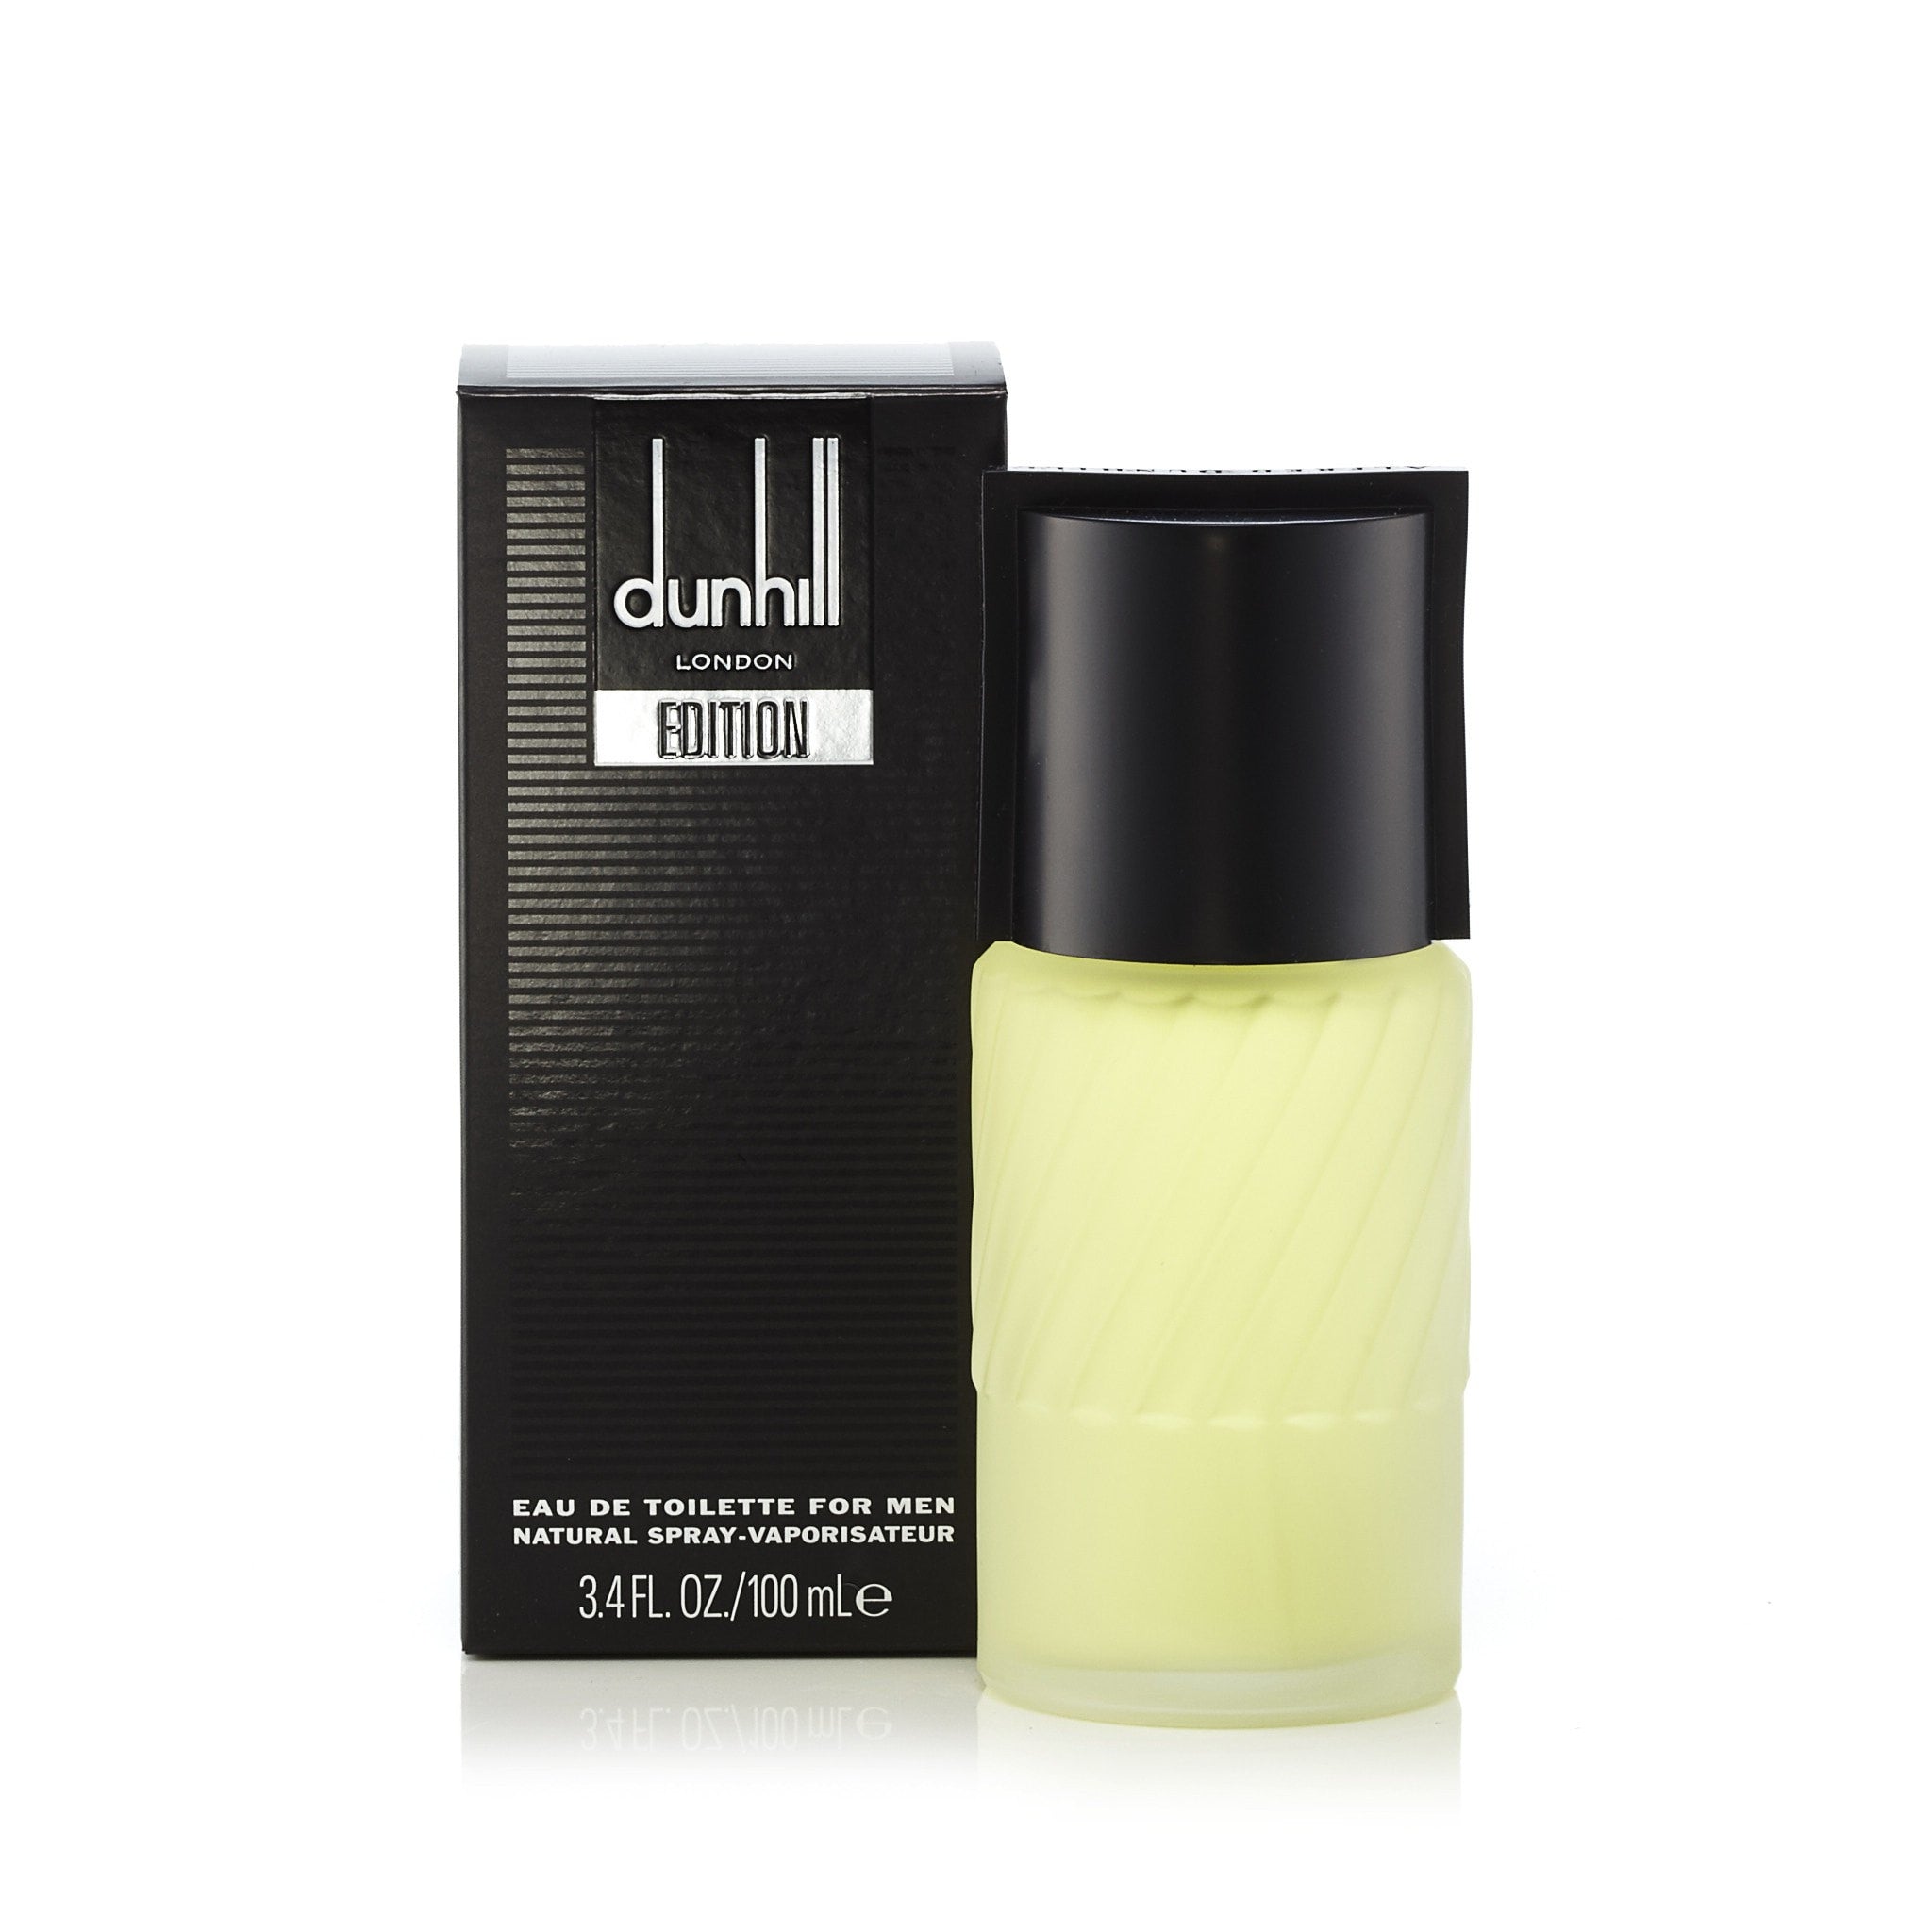 Edition Eau de Toilette Spray for Men by Alfred Dunhill Secondary image